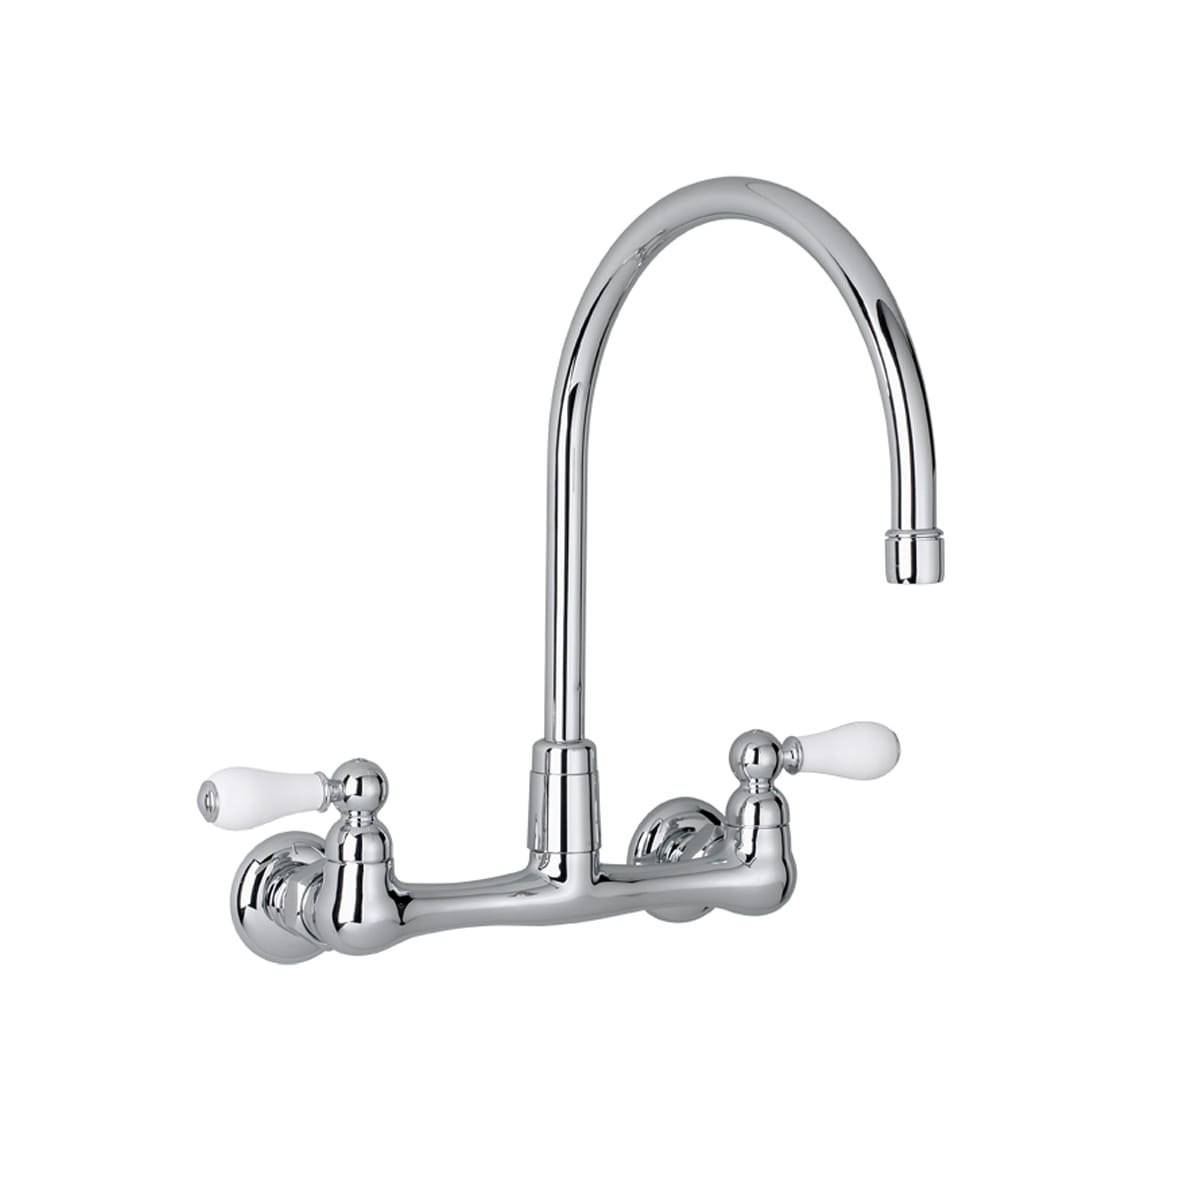 American Standard 7293 252 002 Chrome Heritage Kitchen Faucet